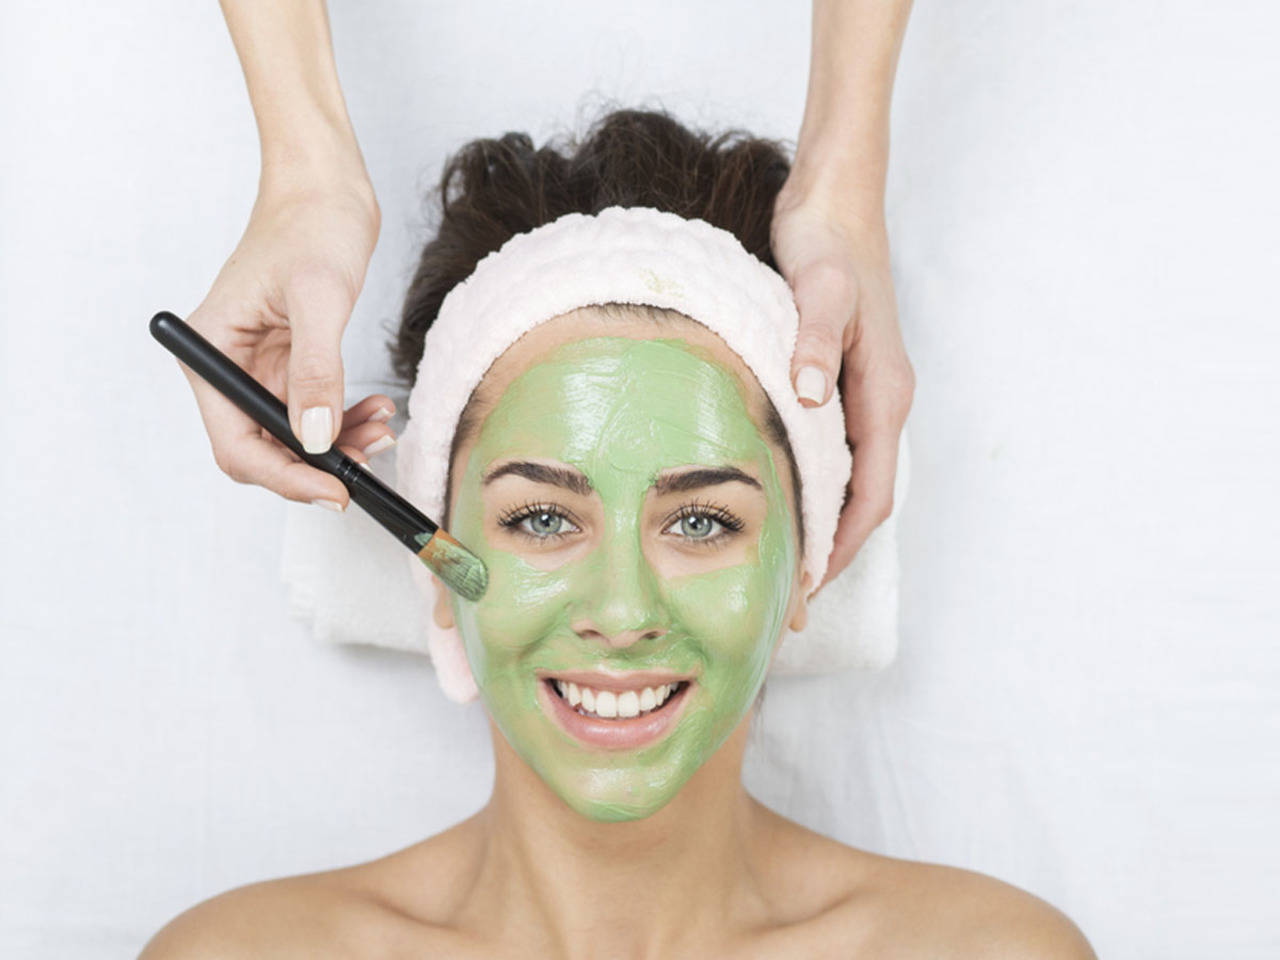 Skin benefits of Green Tea and easy face masks! Sex Image Hq